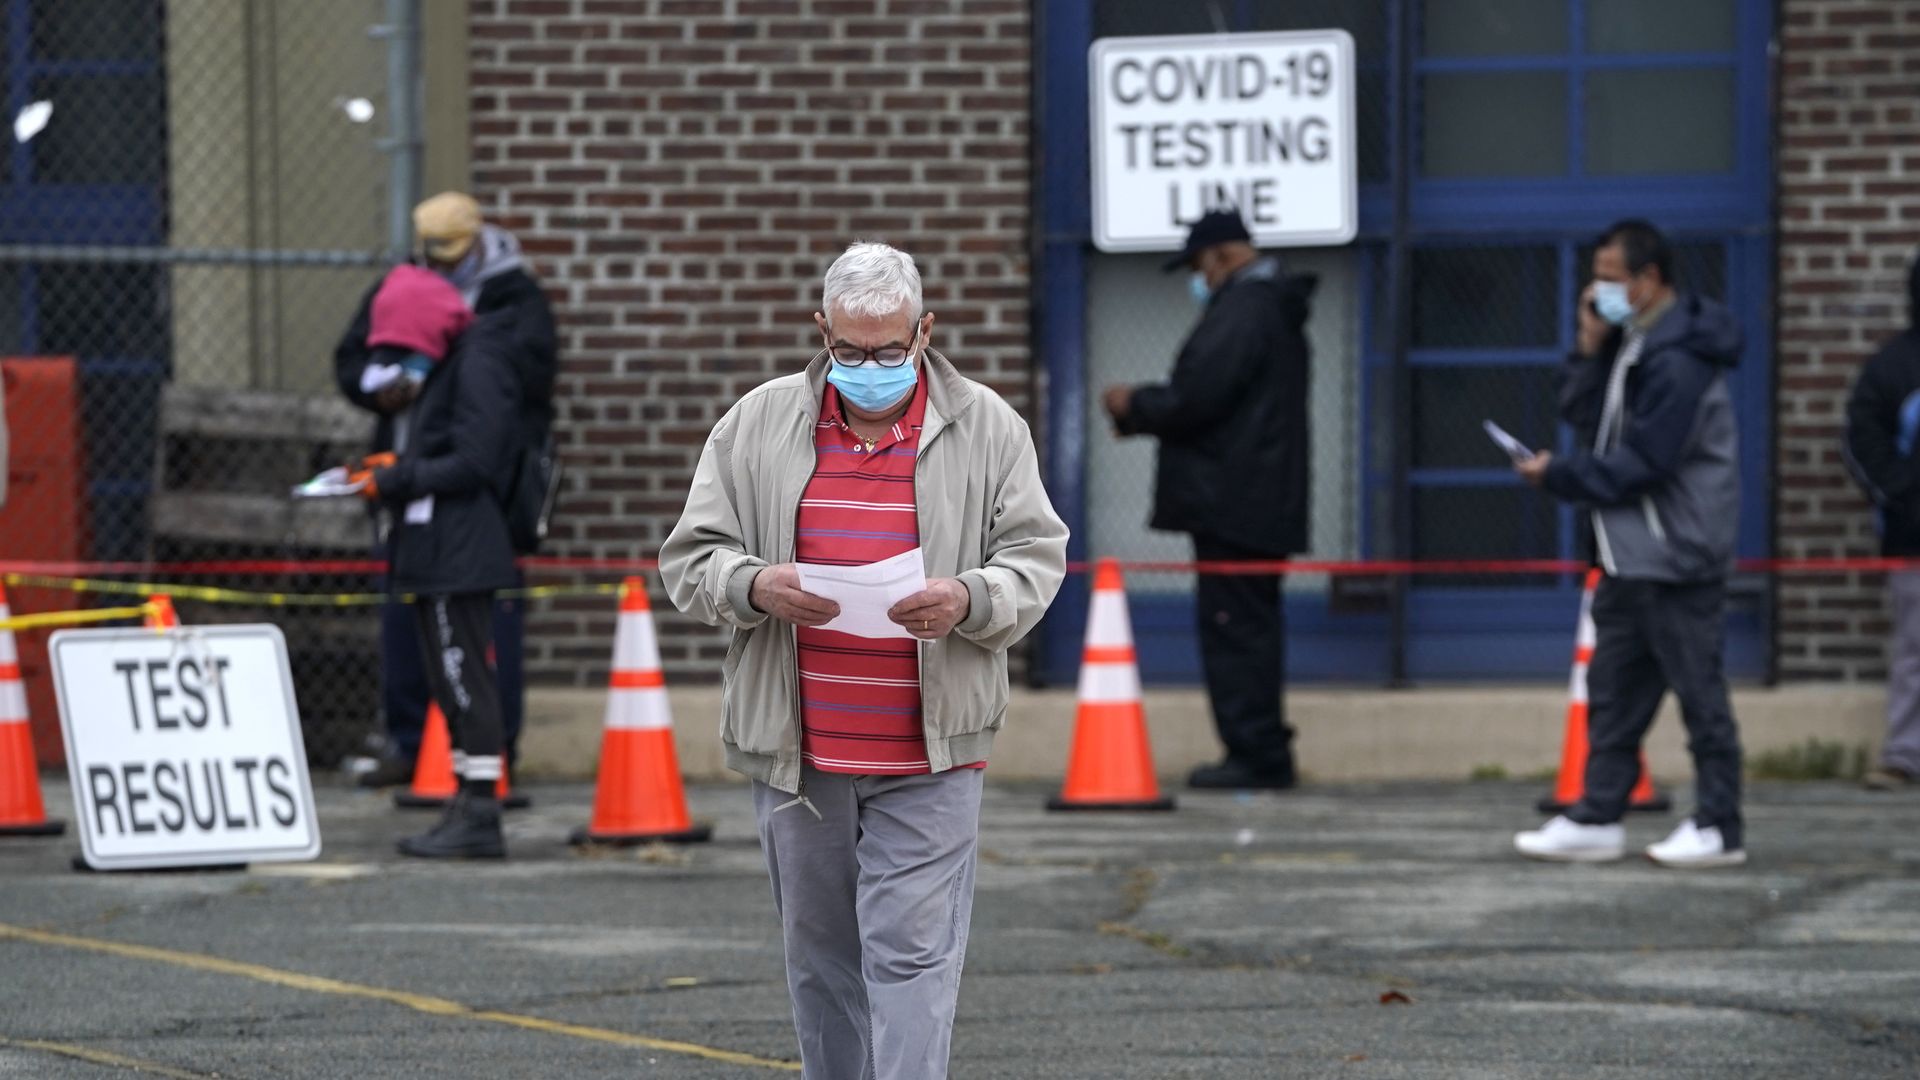 People wait in line to get tested for Covid-19 at the Ann Street School Covid-19 Testing Center in Newark, New Jersey